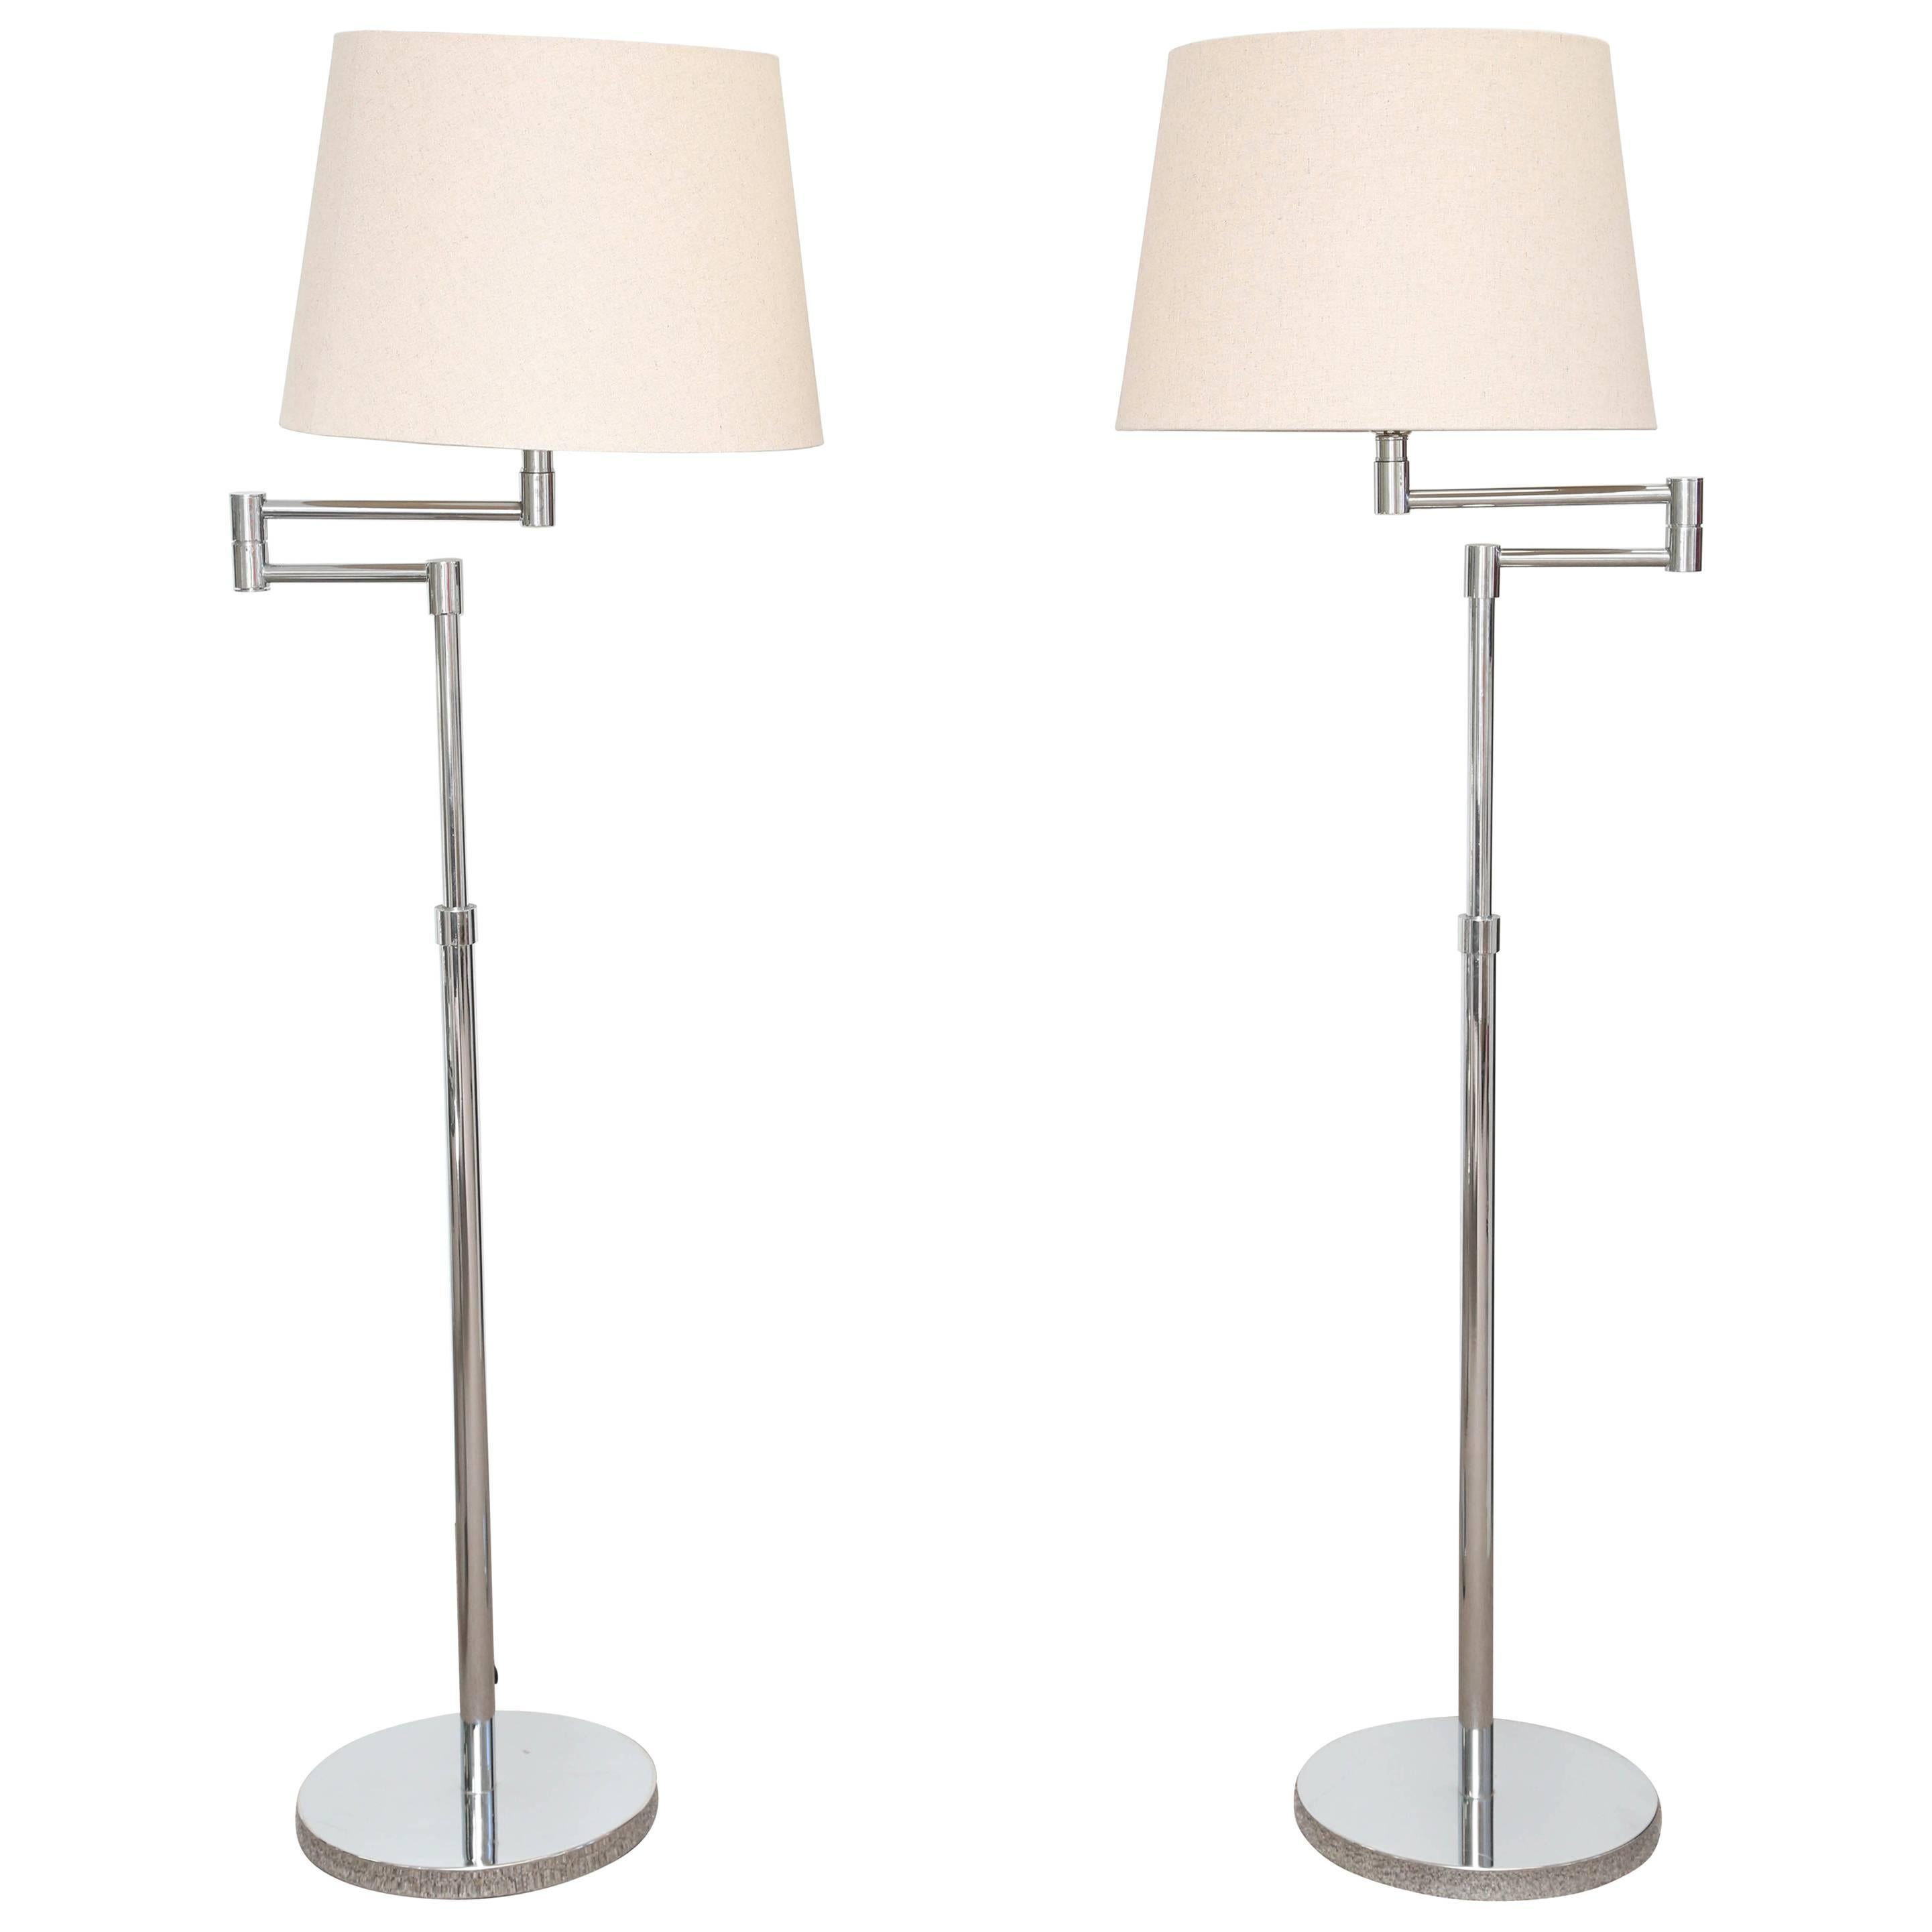 Pair of Mid-Century Chrome Floor Lamps with Articulated Arm